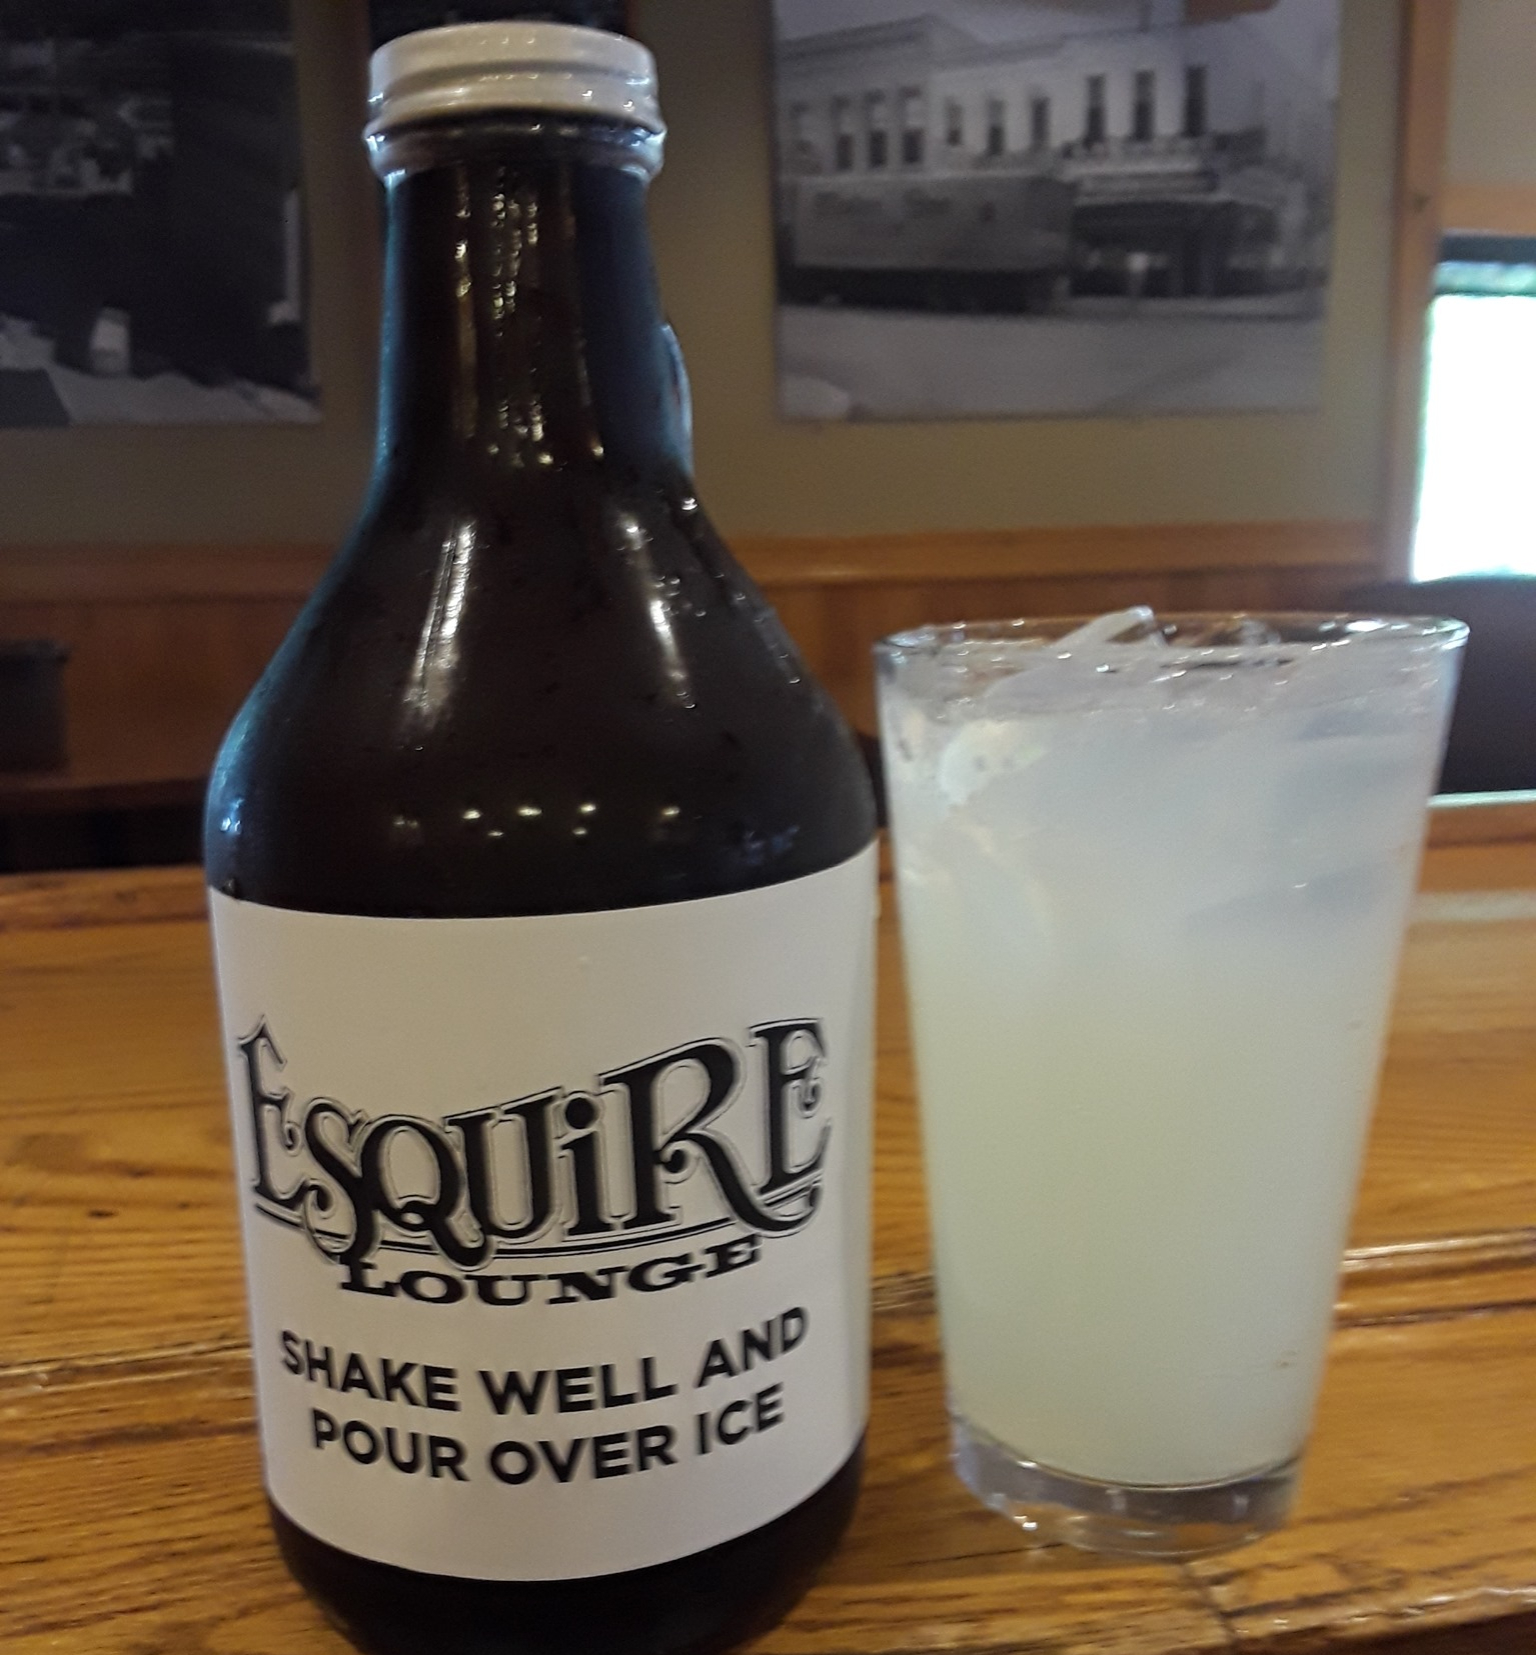 A glass growler sits next to a large glass of a light yellow margarita on a wooden bar. The growler is labeled: Esquire Lounge, shake well and pour over ice. Photo from Esquire's Facebook page.